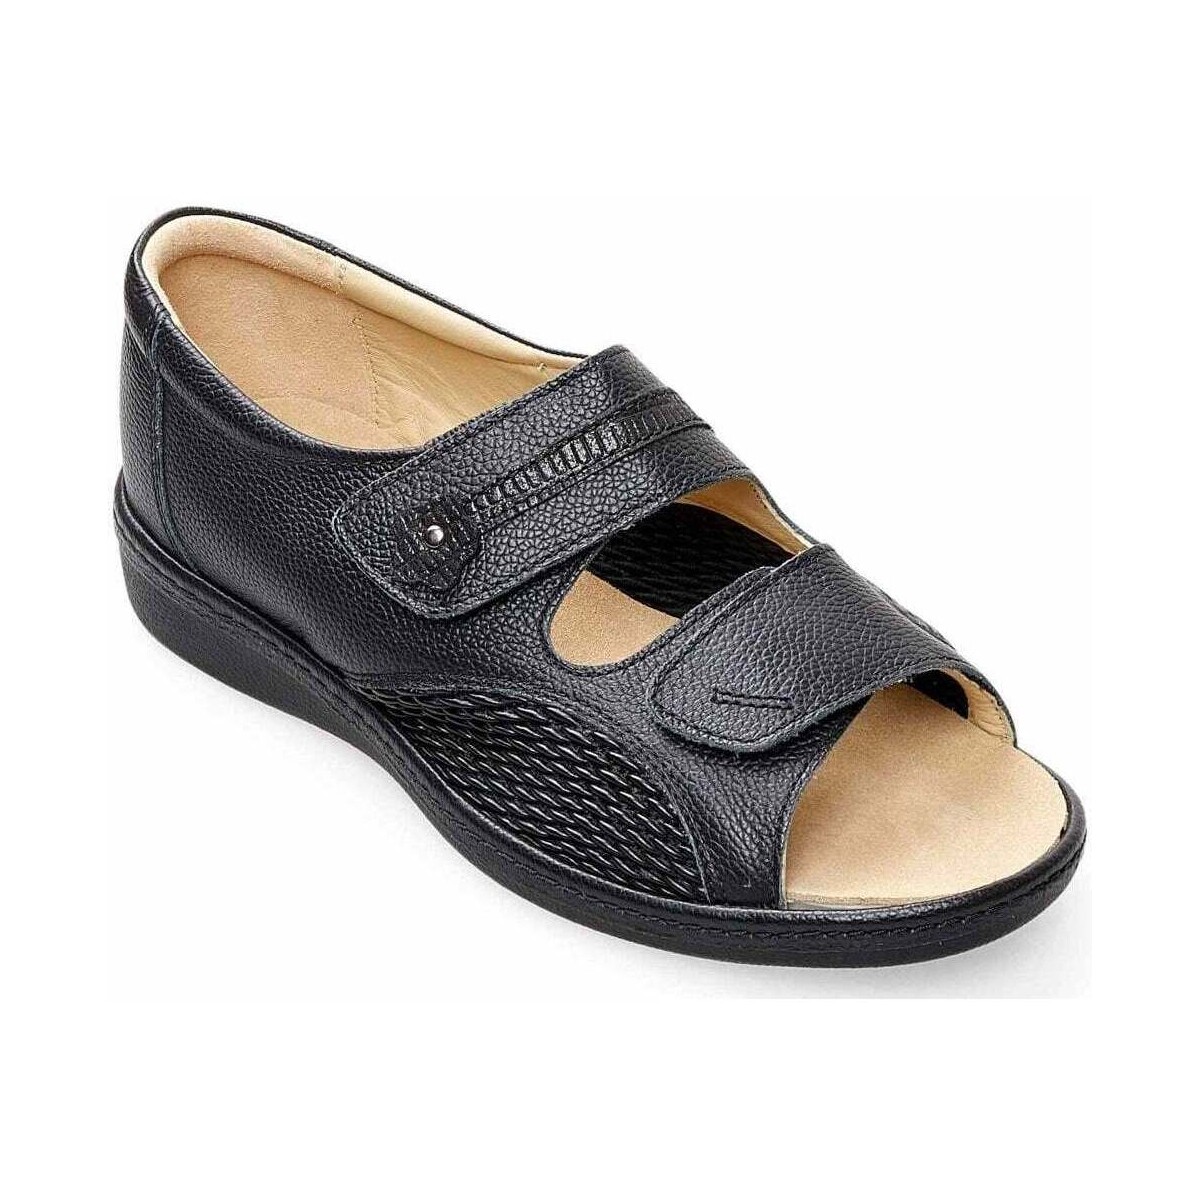 Shoes Women Sandals Padders Peaceful Womens Wide Fit Sandals Black